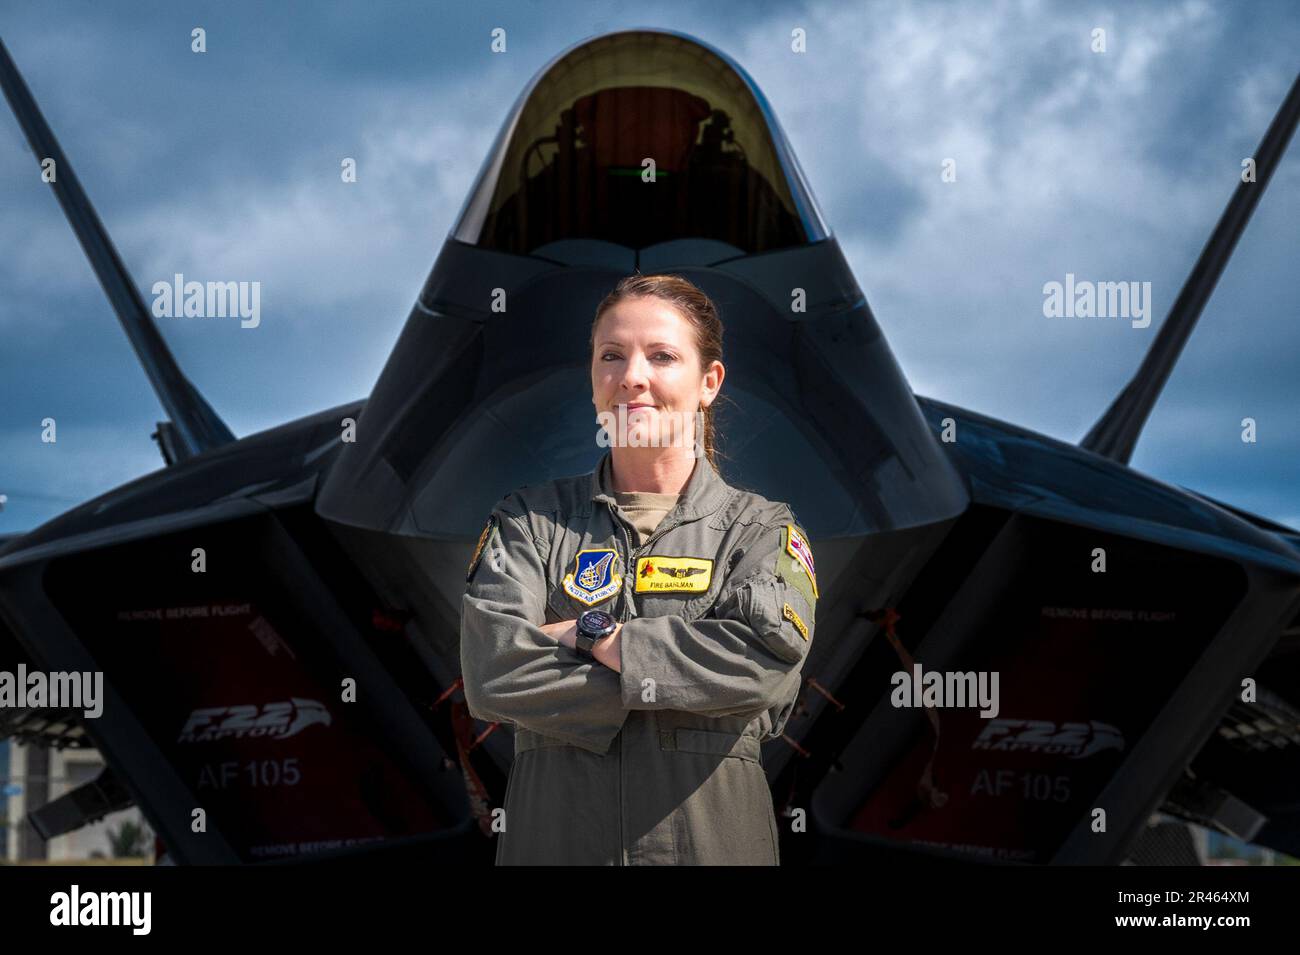 U.S. Air Force Capt. Nichole Bahlman, 199th Fighter Squadron F-22 Raptor pilot, poses in front of her aircraft prior to take-off during a routine training mission Joint Base Pearl Harbor-Hickam, Hawaii, Mar 14, 2023. Capt. Bahlman is the first female fighter pilot in the Hawaii Air National Guard. Stock Photo